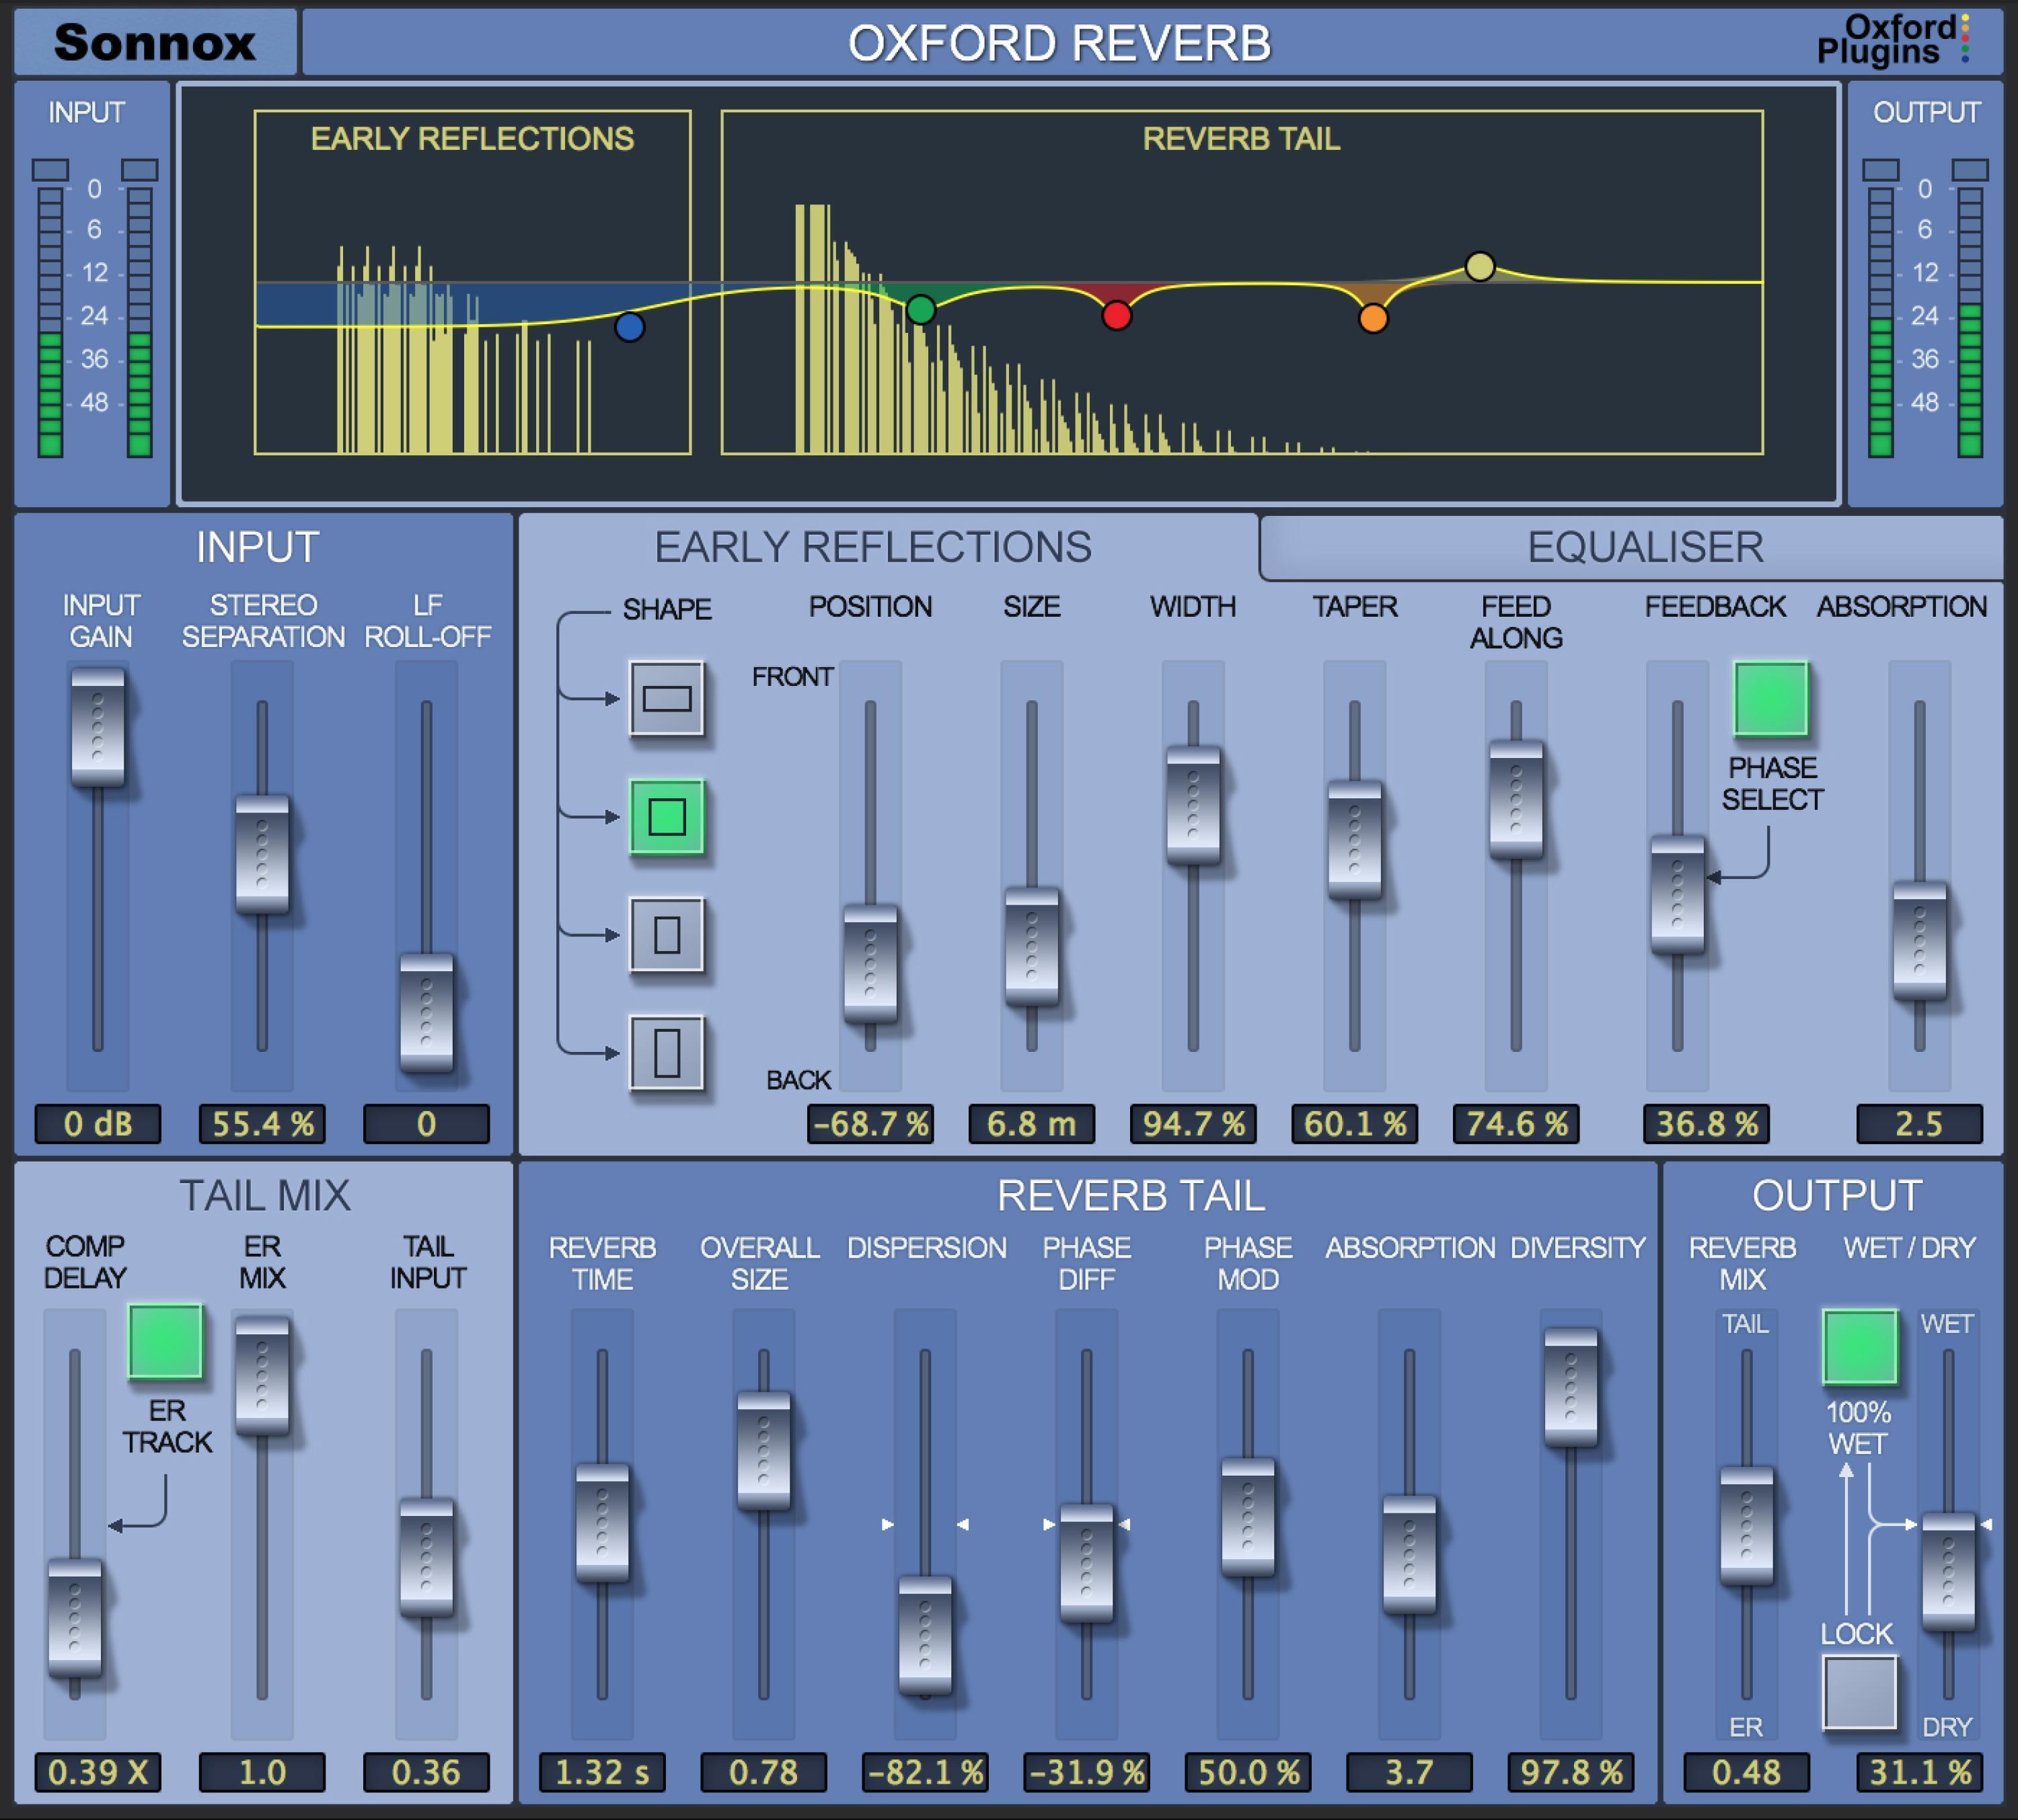 Sonnox Oxford Reverb Native Plug-in | Sweetwater